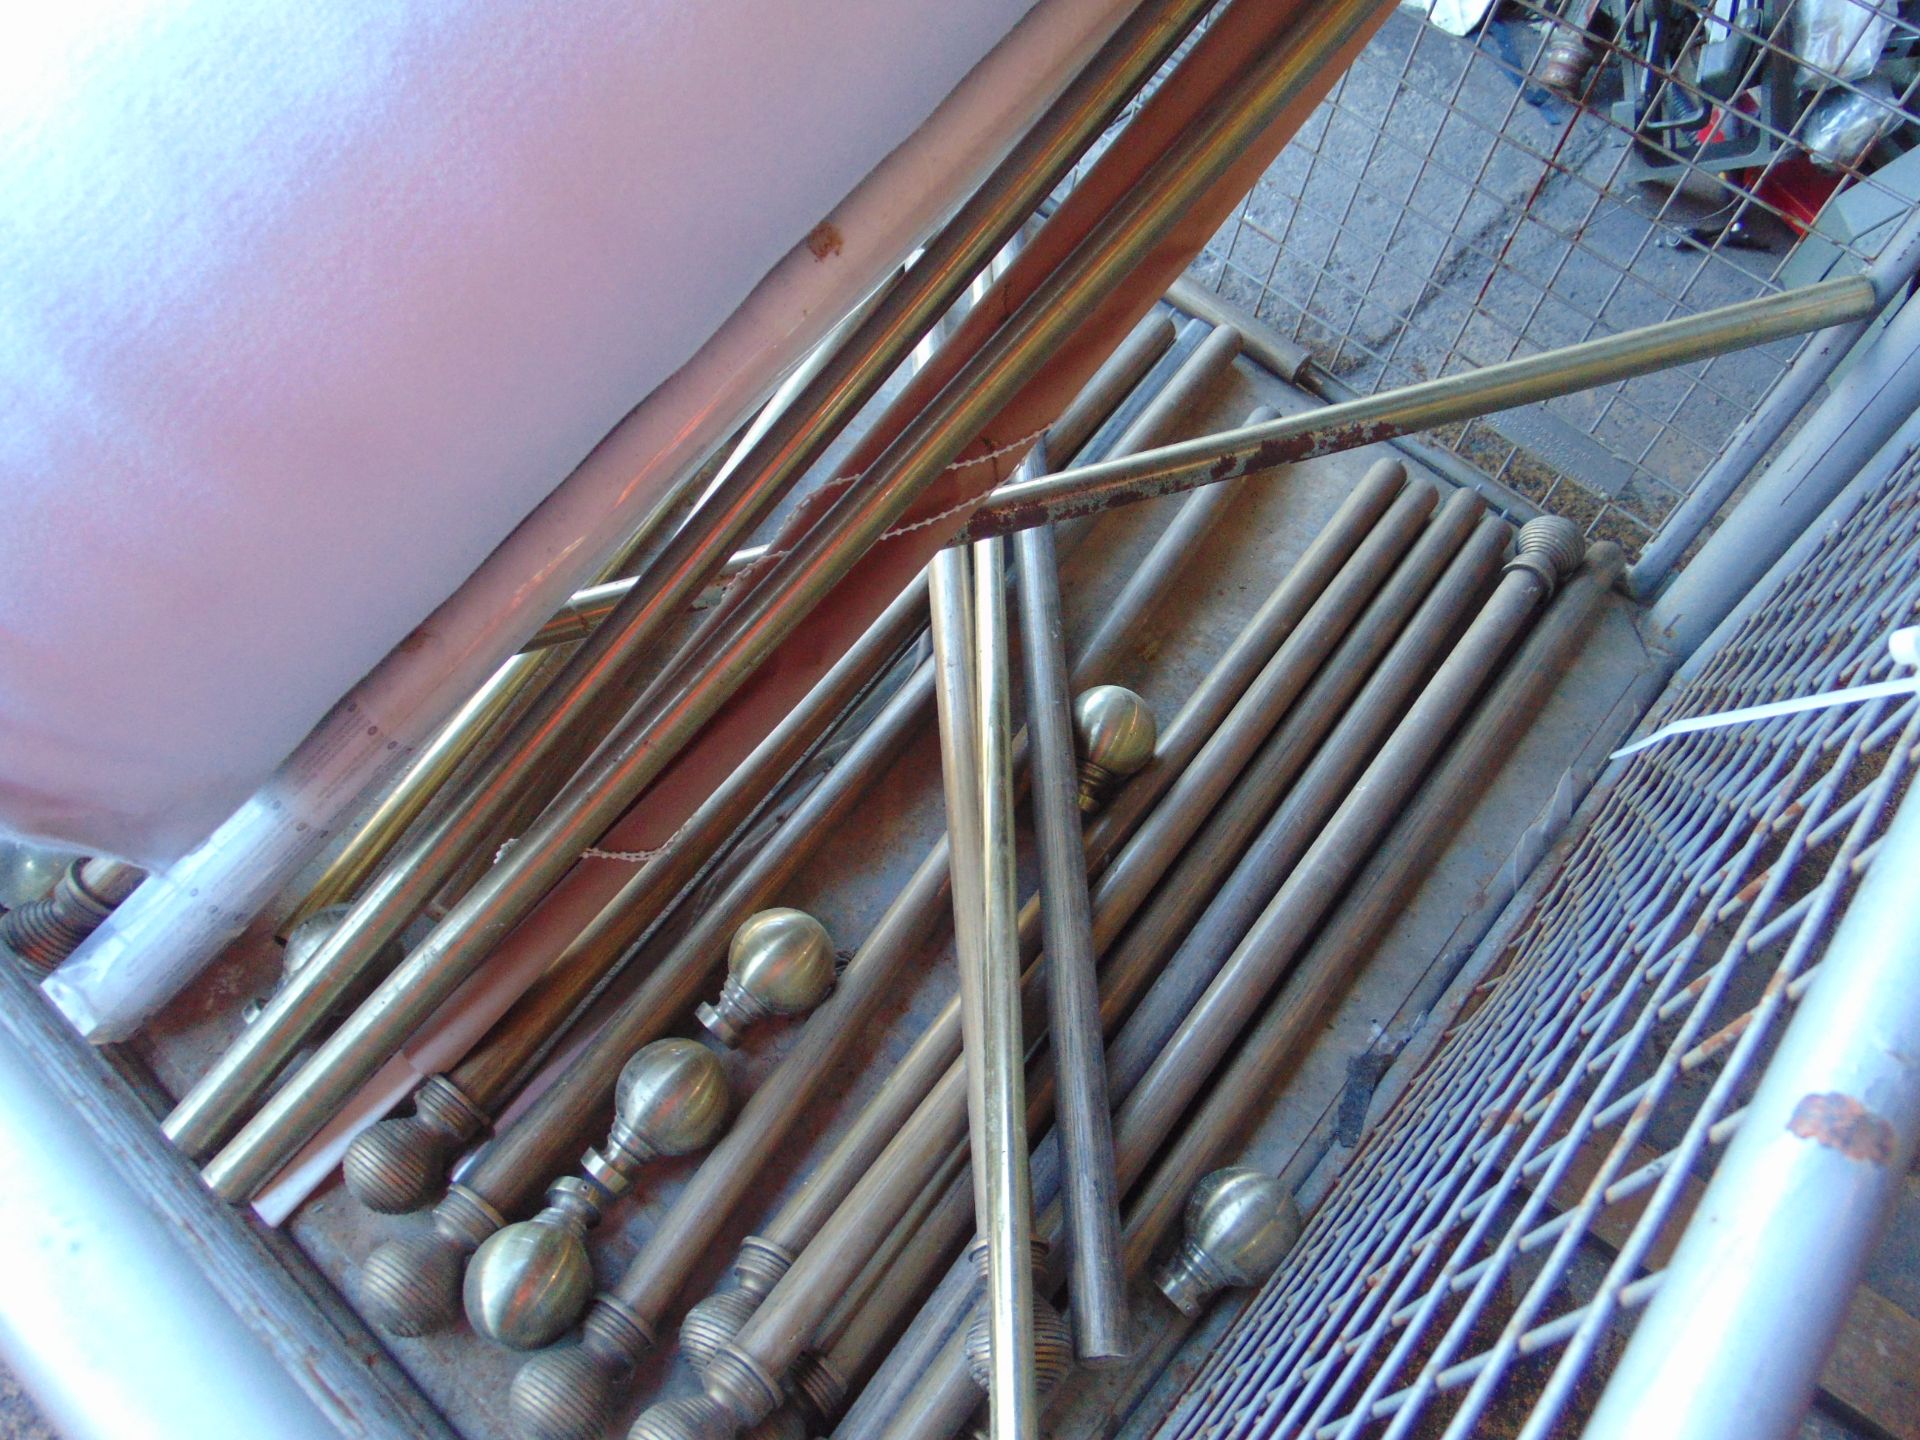 1x Stillage Large Roll of Insulating Material Curton Rails, Copper Pipe etc - Image 3 of 6